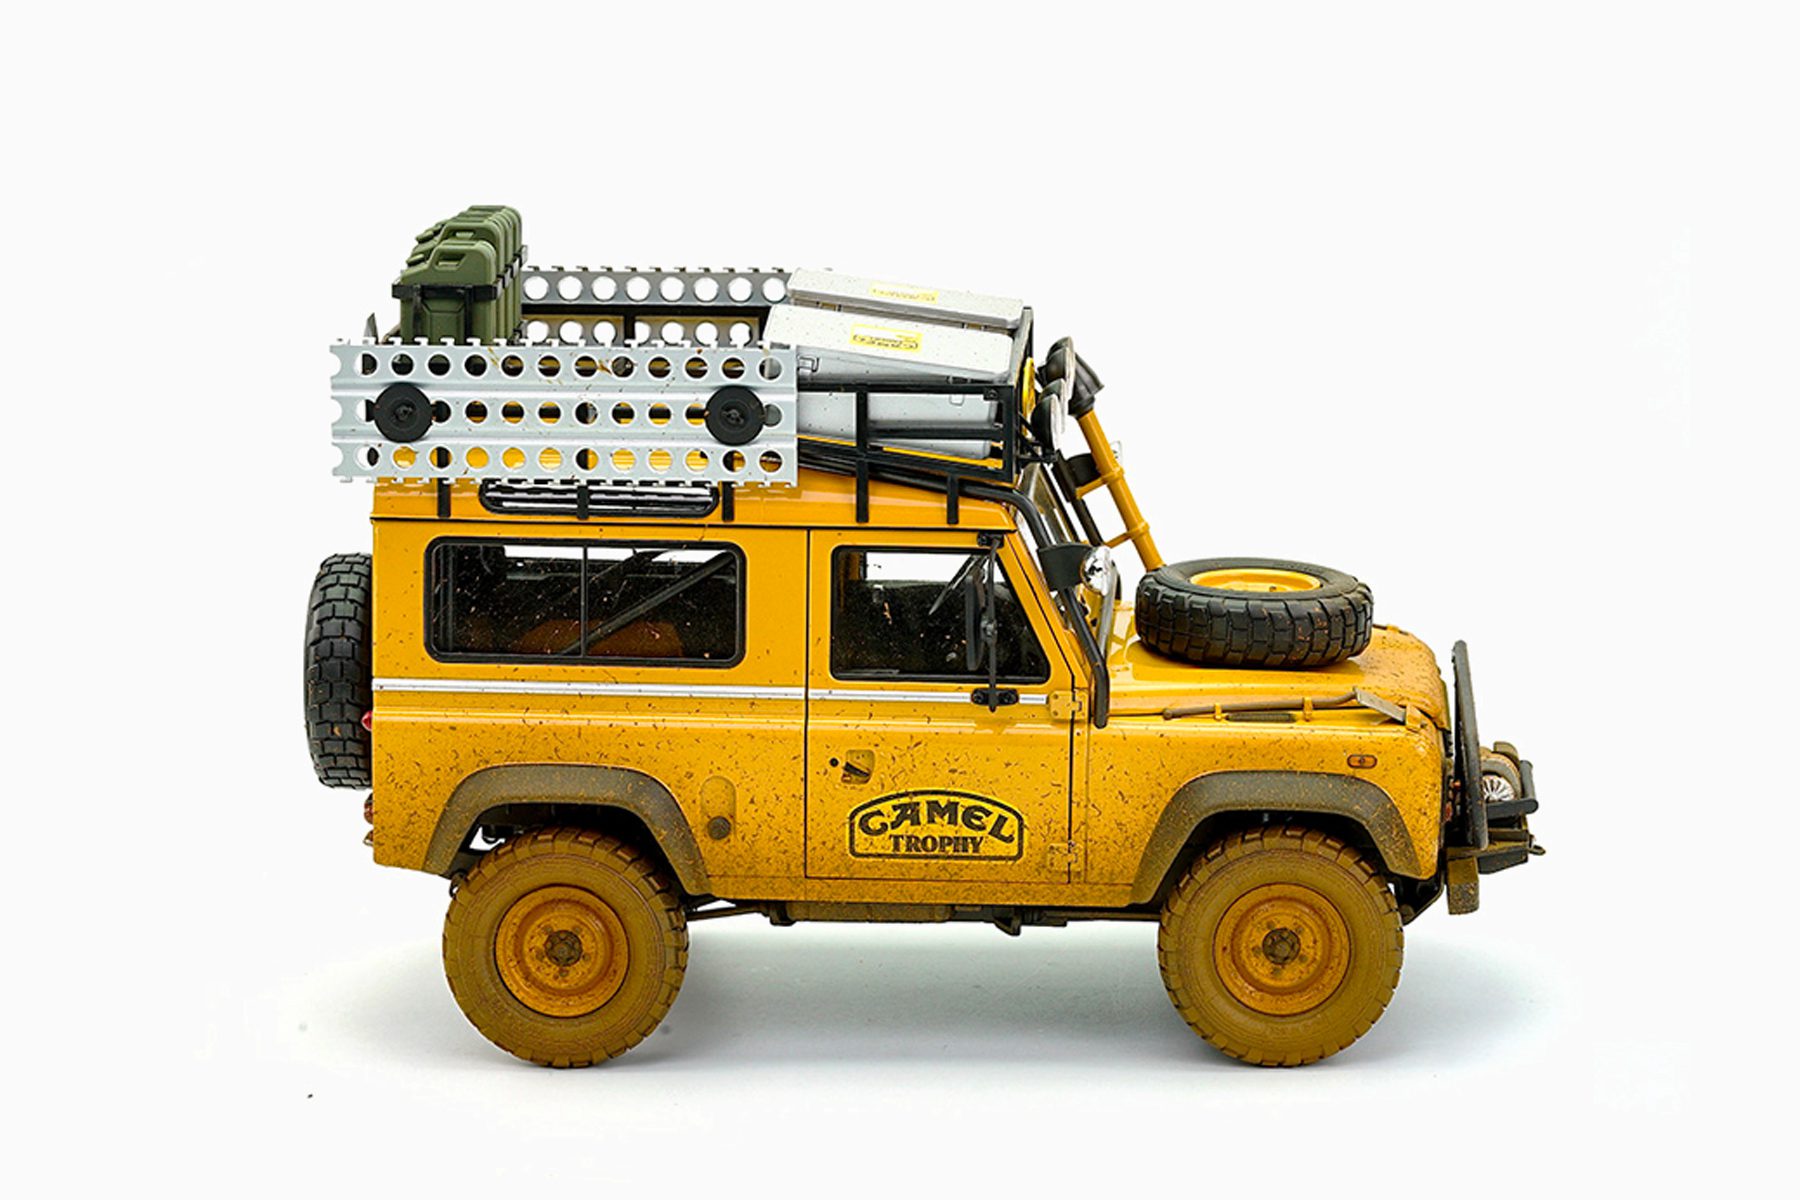 Land Rover Defender 90 Camel Trophy Dirty Edition 1:18